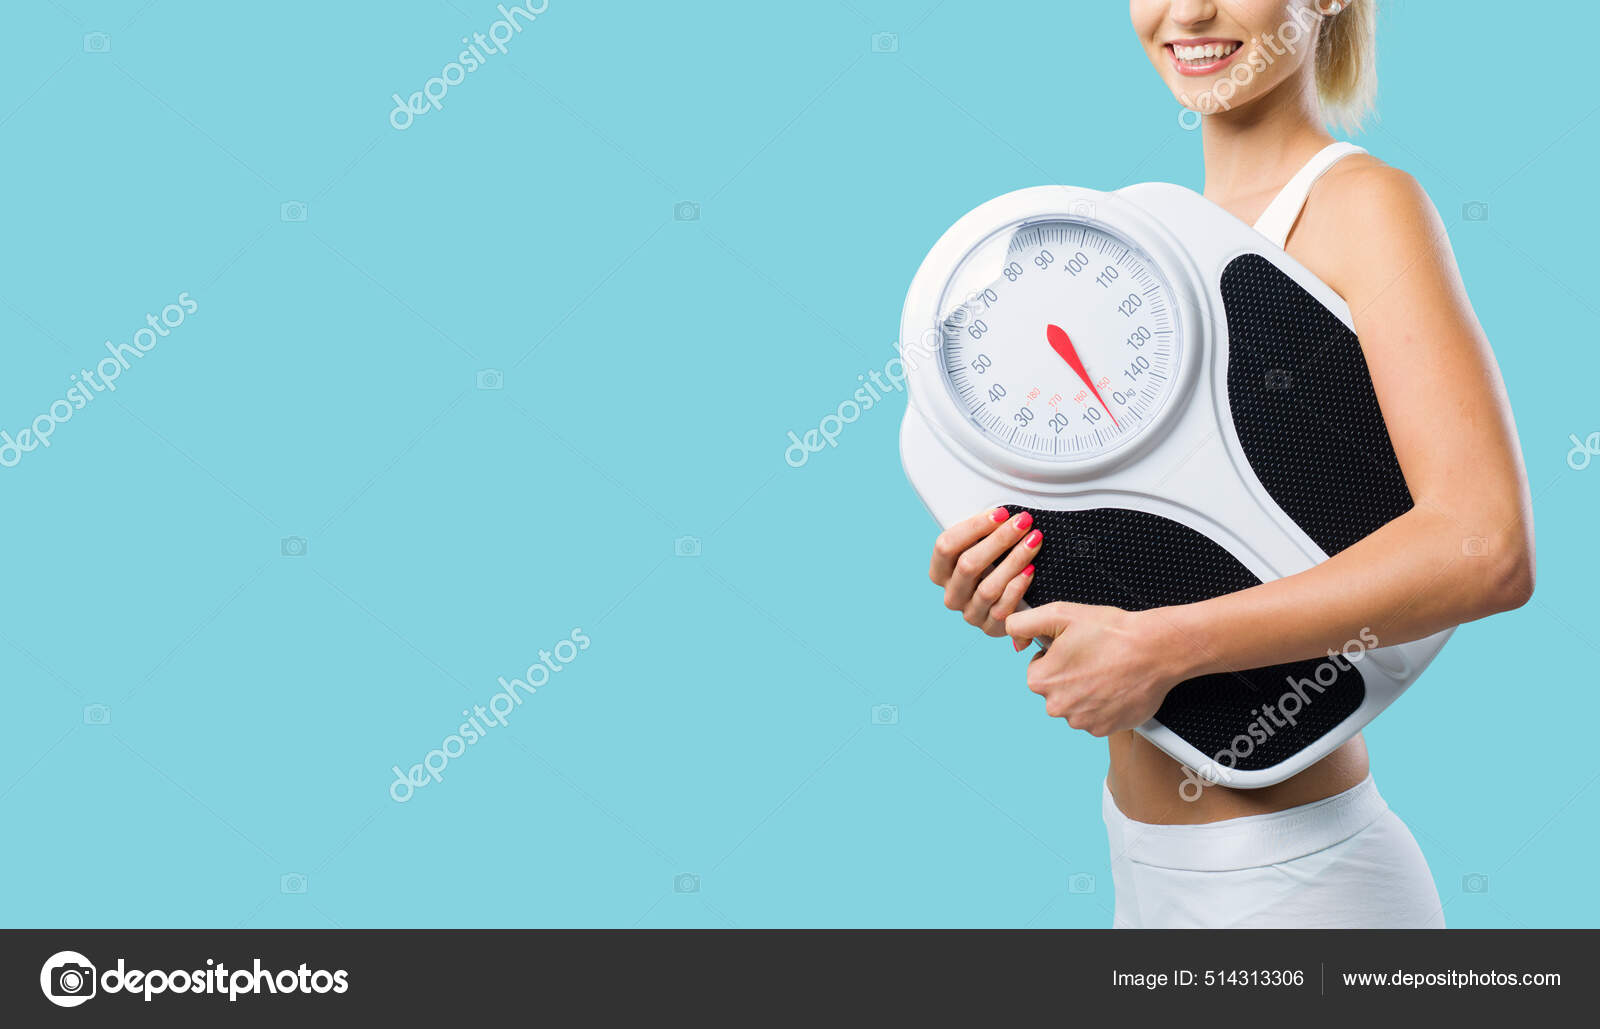 Weight Scale And Tape Measure Dieting Concepts Stock Photo